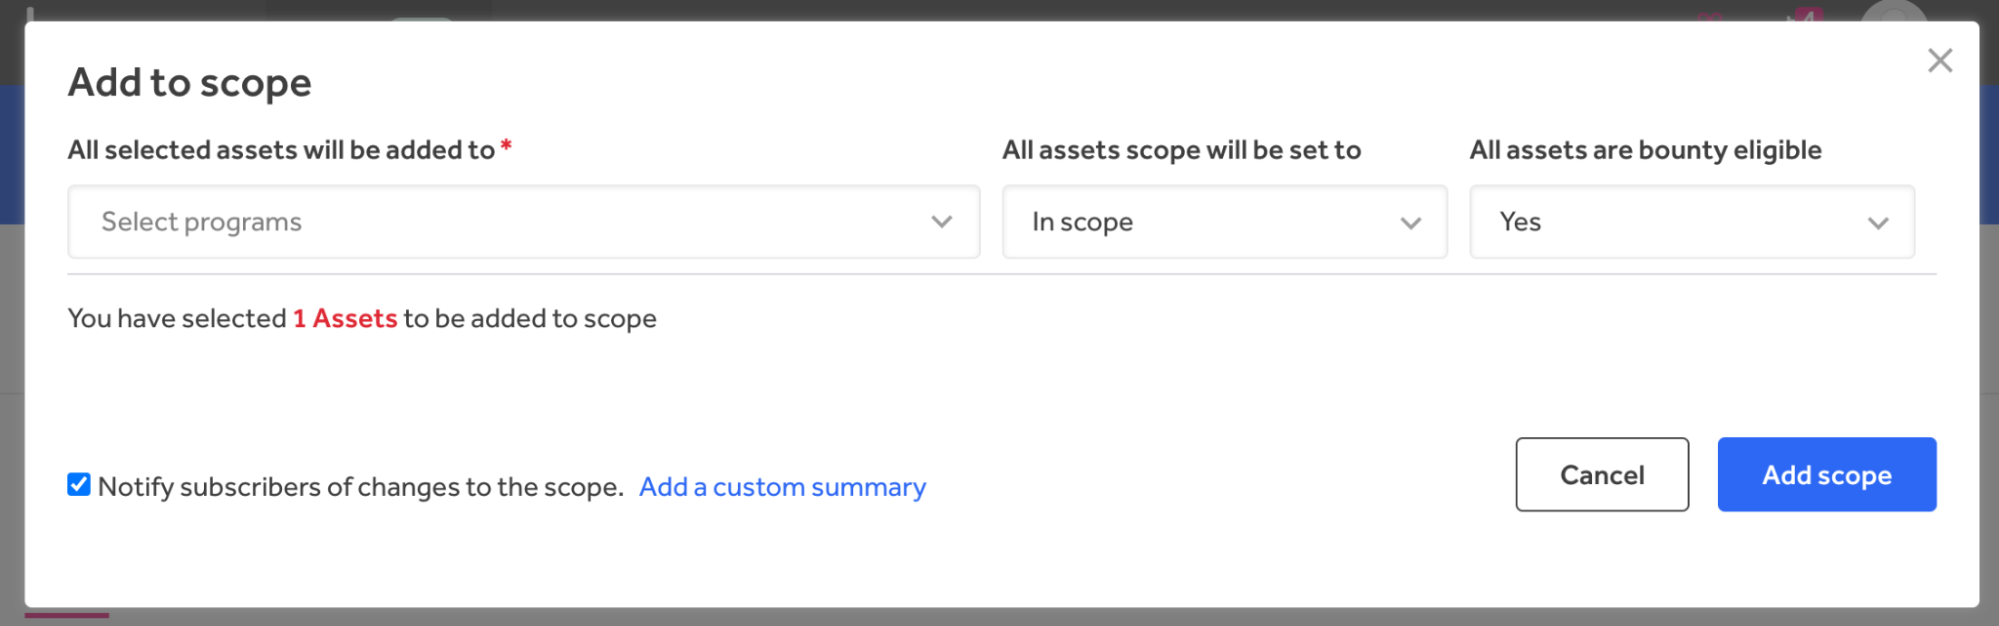 Figure 2 - Adding assets to the scope of a bug bounty program.